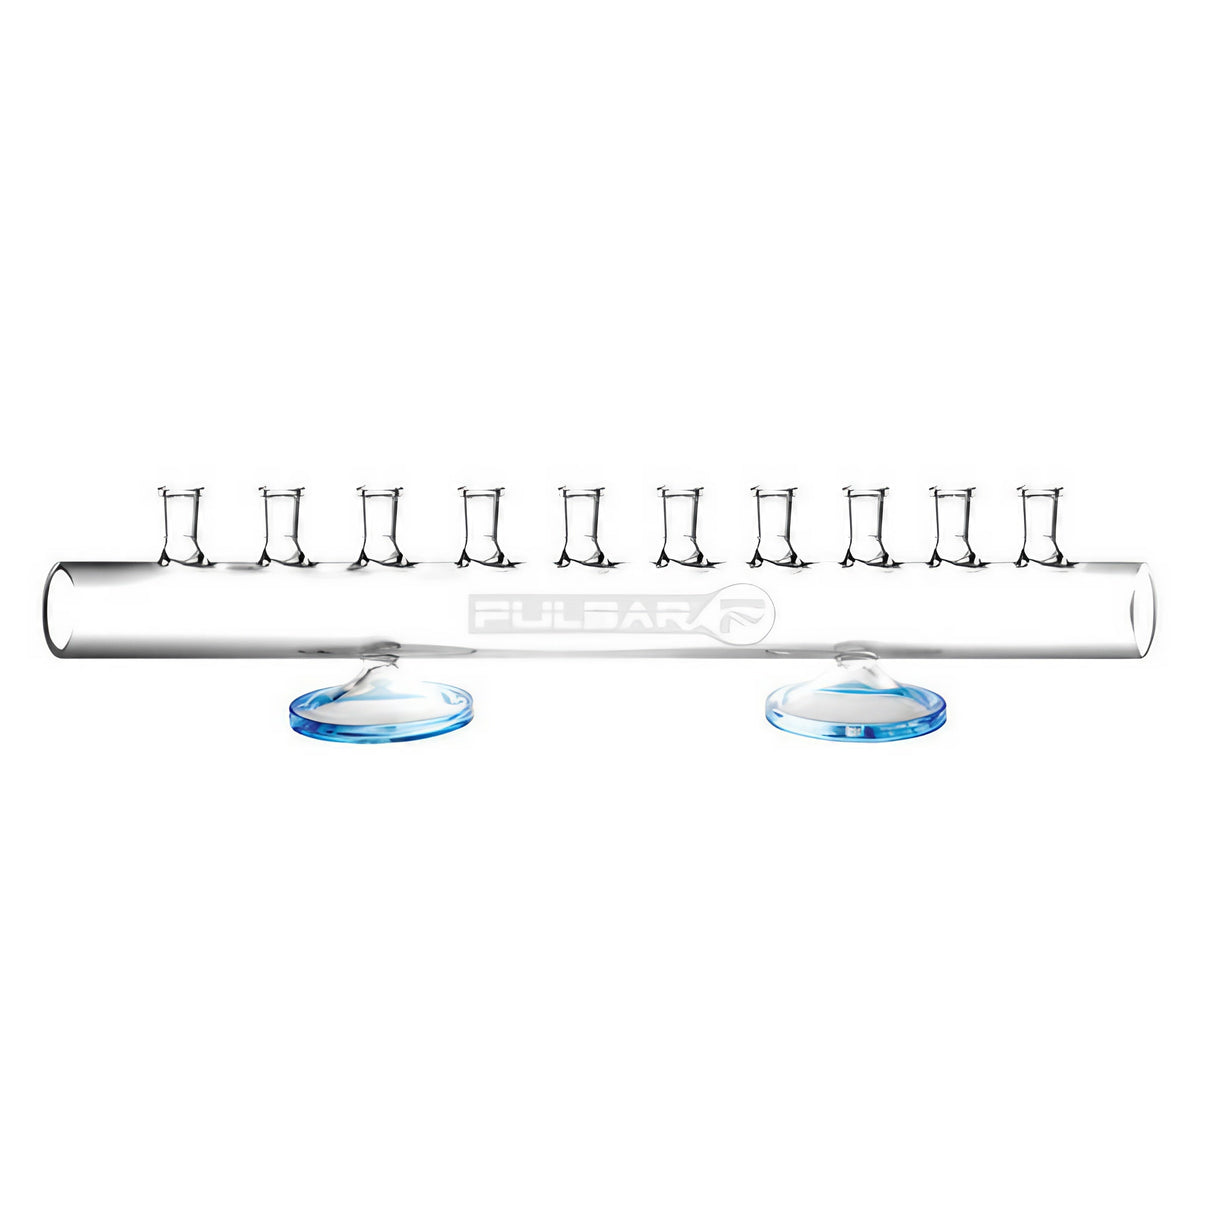 Pulsar borosilicate glass display for bangers and bowls with 14mm joints on white background